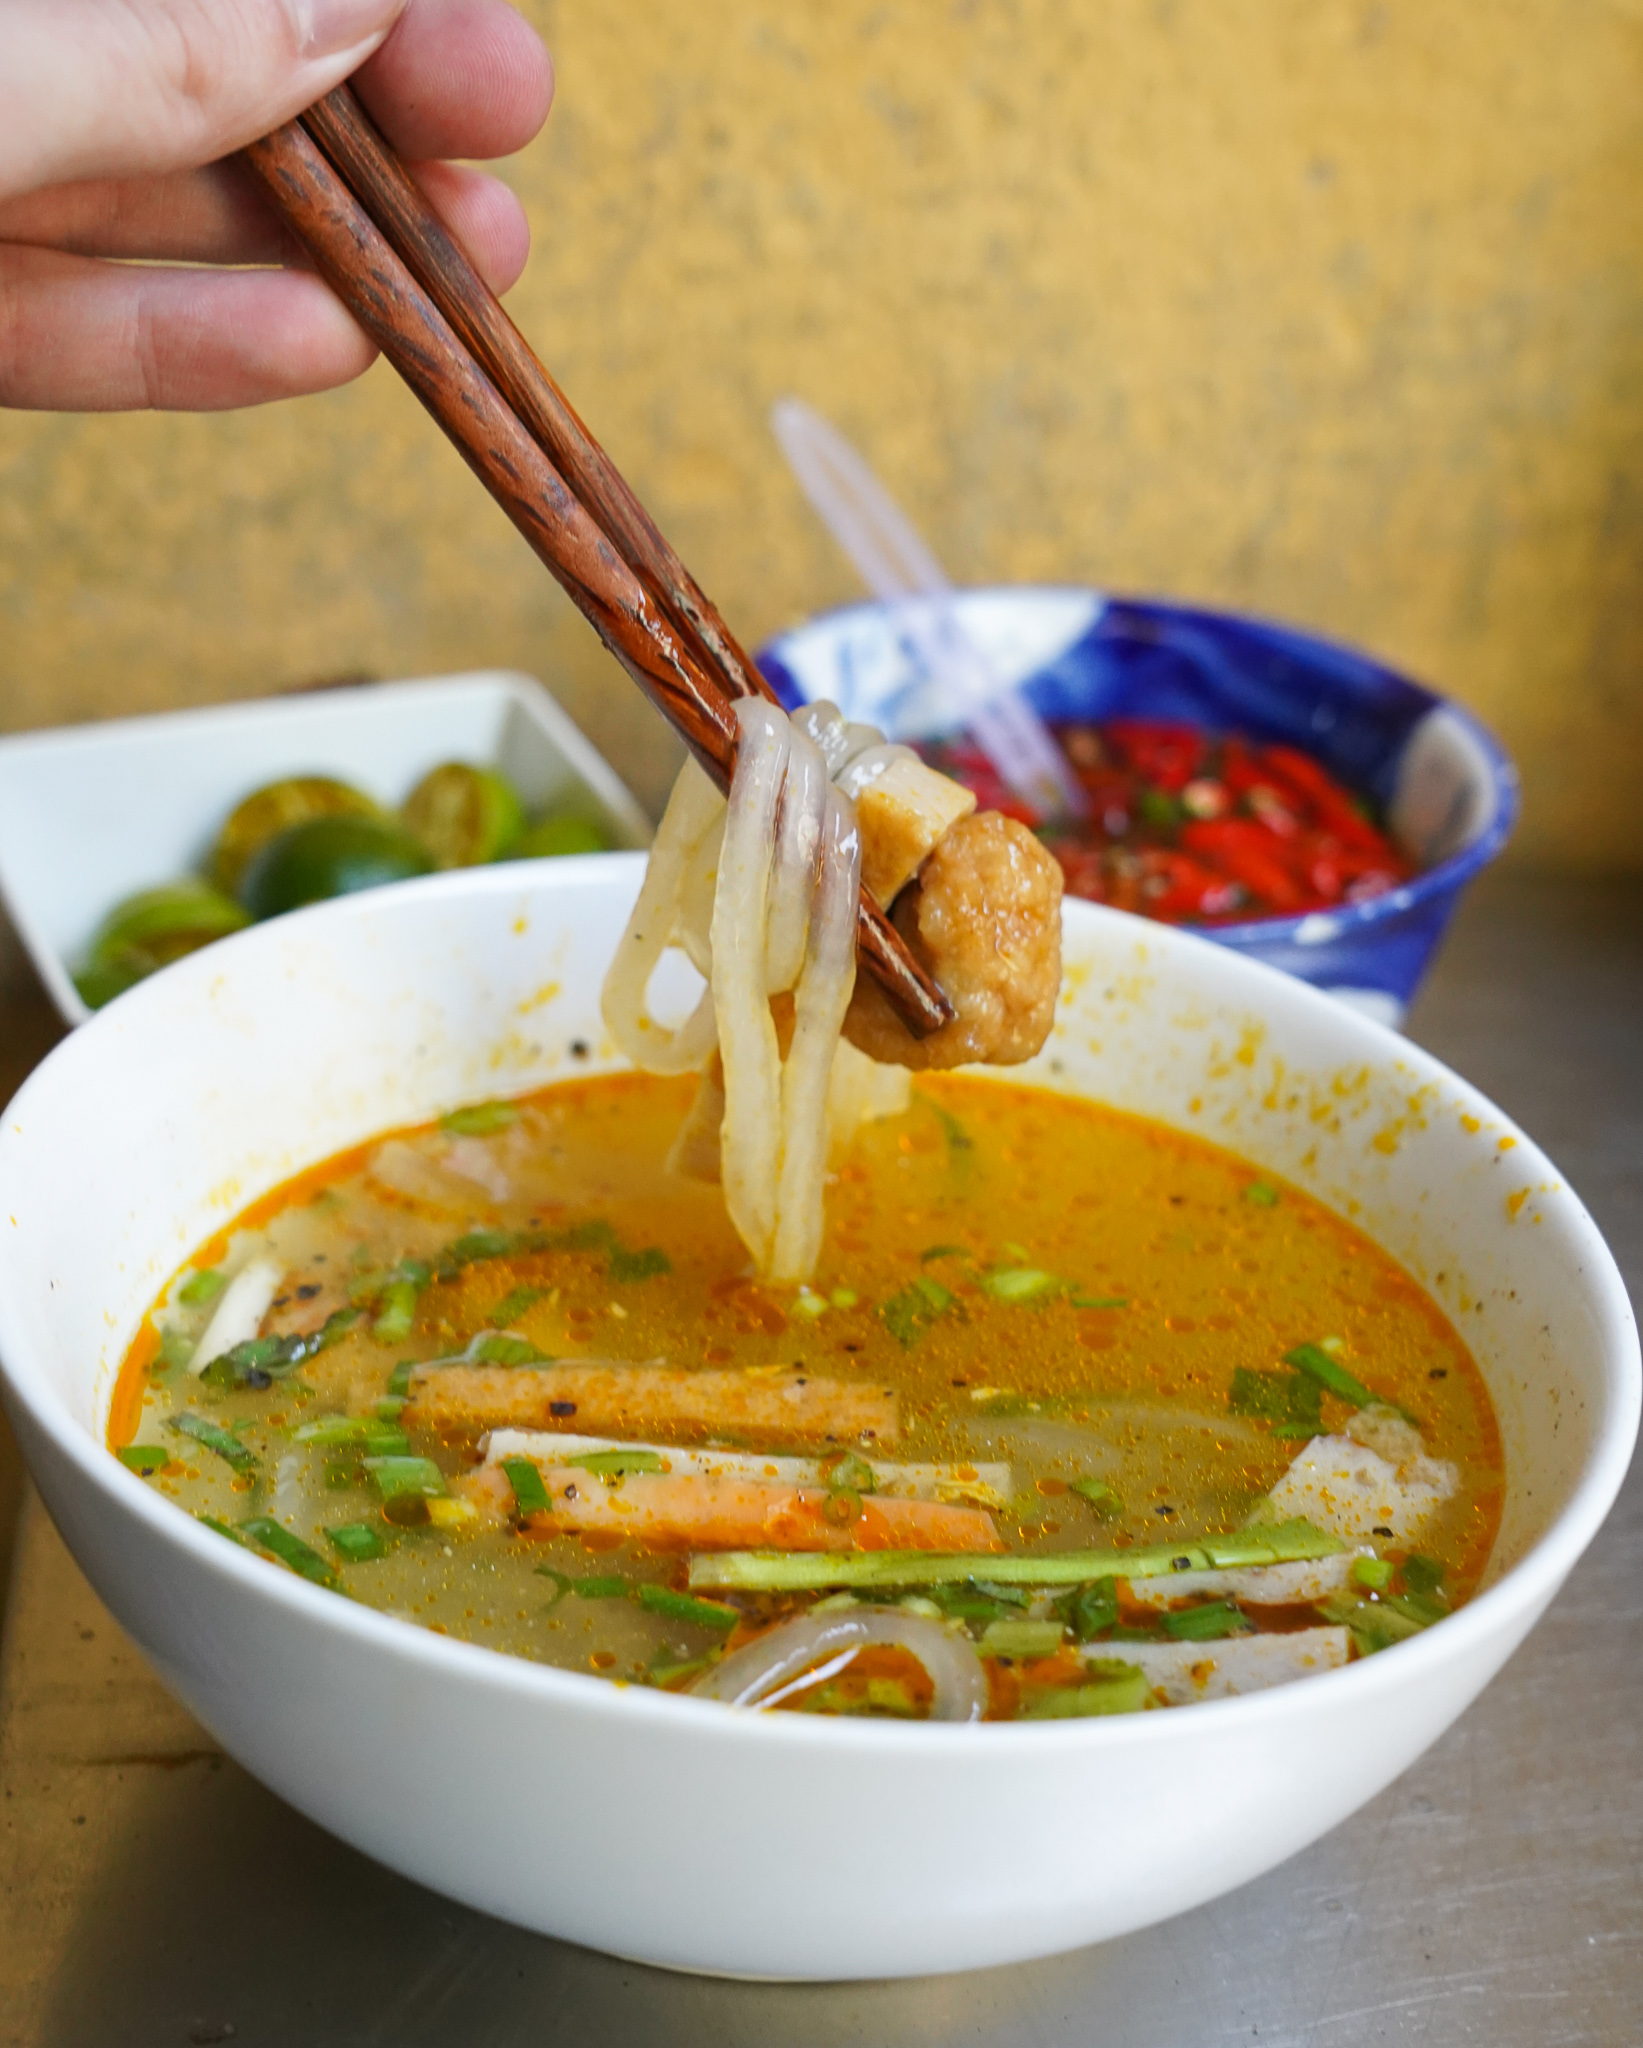 Hoi An Street Food Guide | The Dishelin Guide